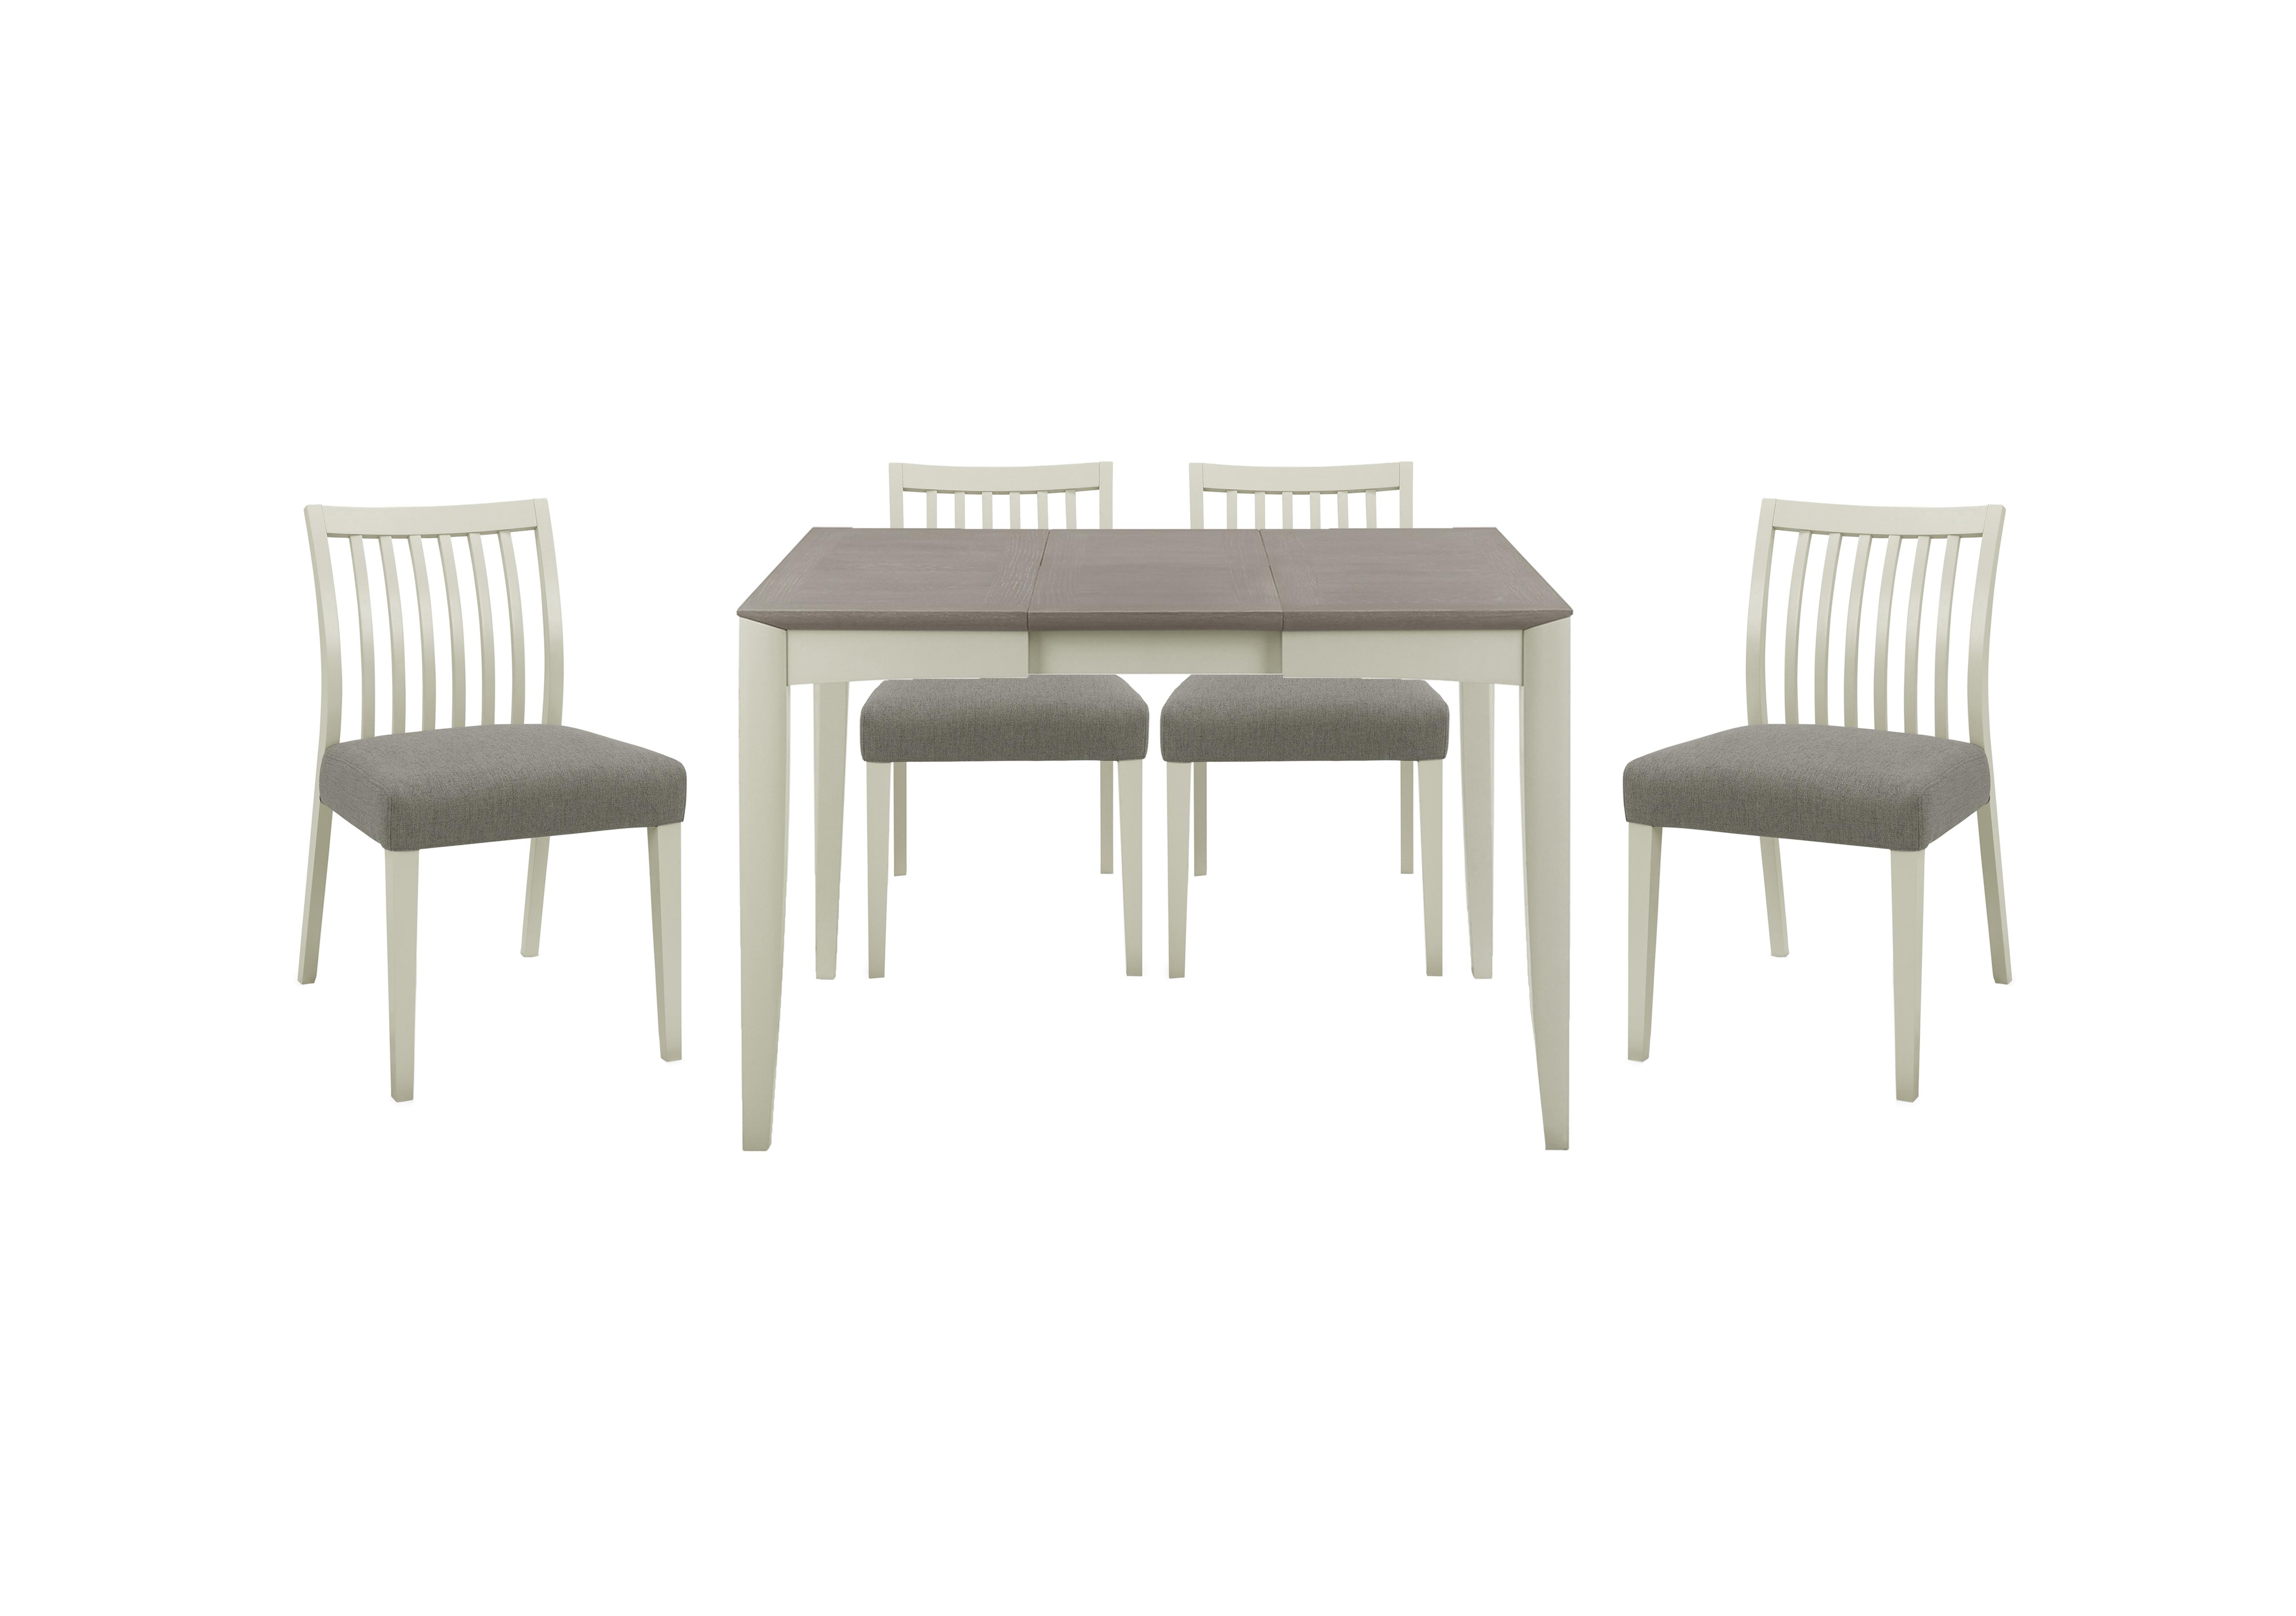 Skye Small Table and 4 Slatted Chairs in Two Tone/Titanium on Furniture Village